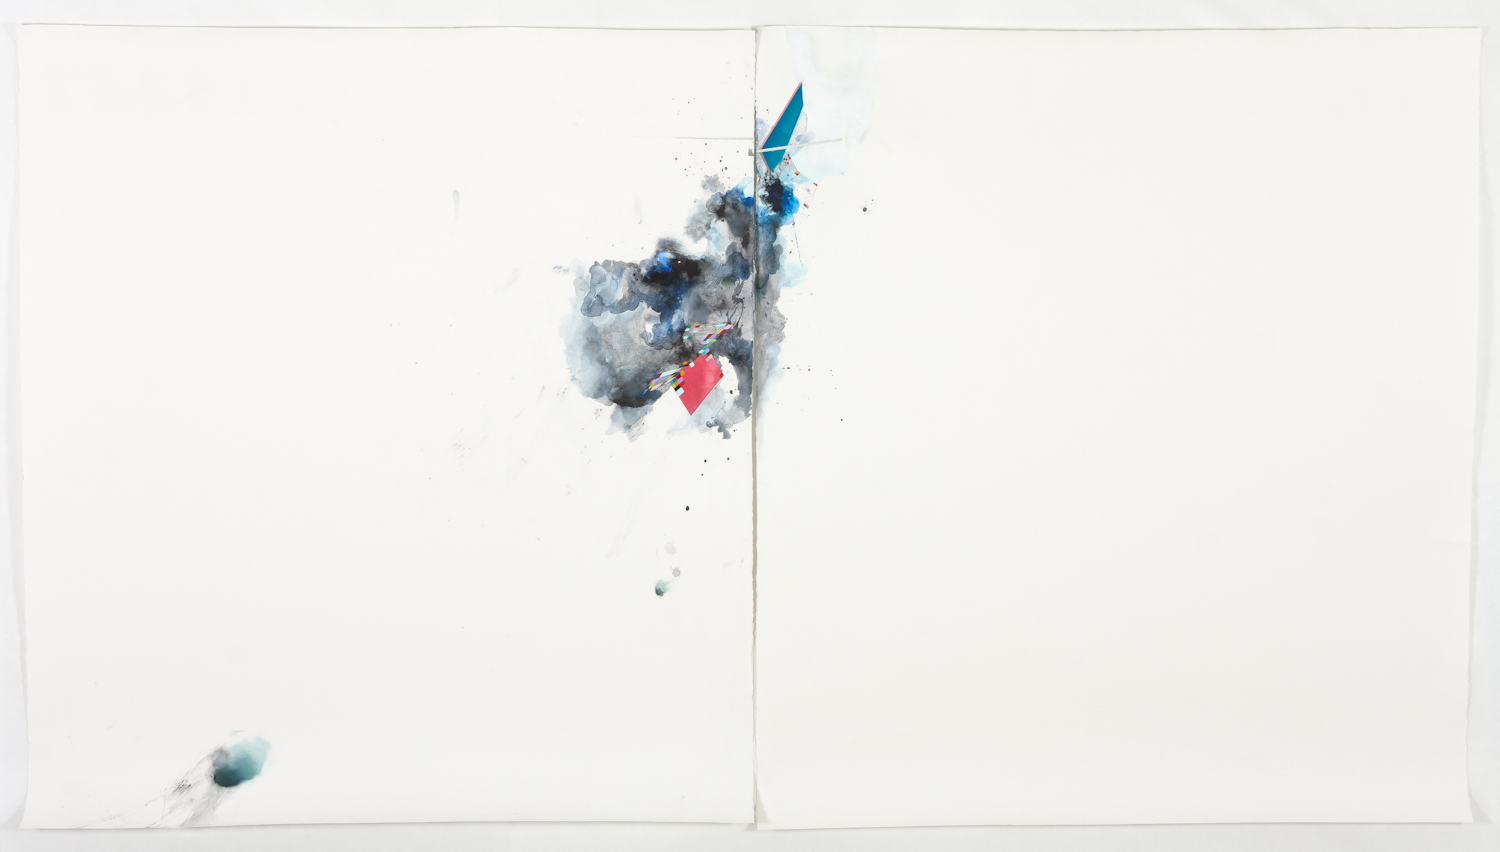  ursting Down, 2013, mixed media on paper, 60" x 102" 